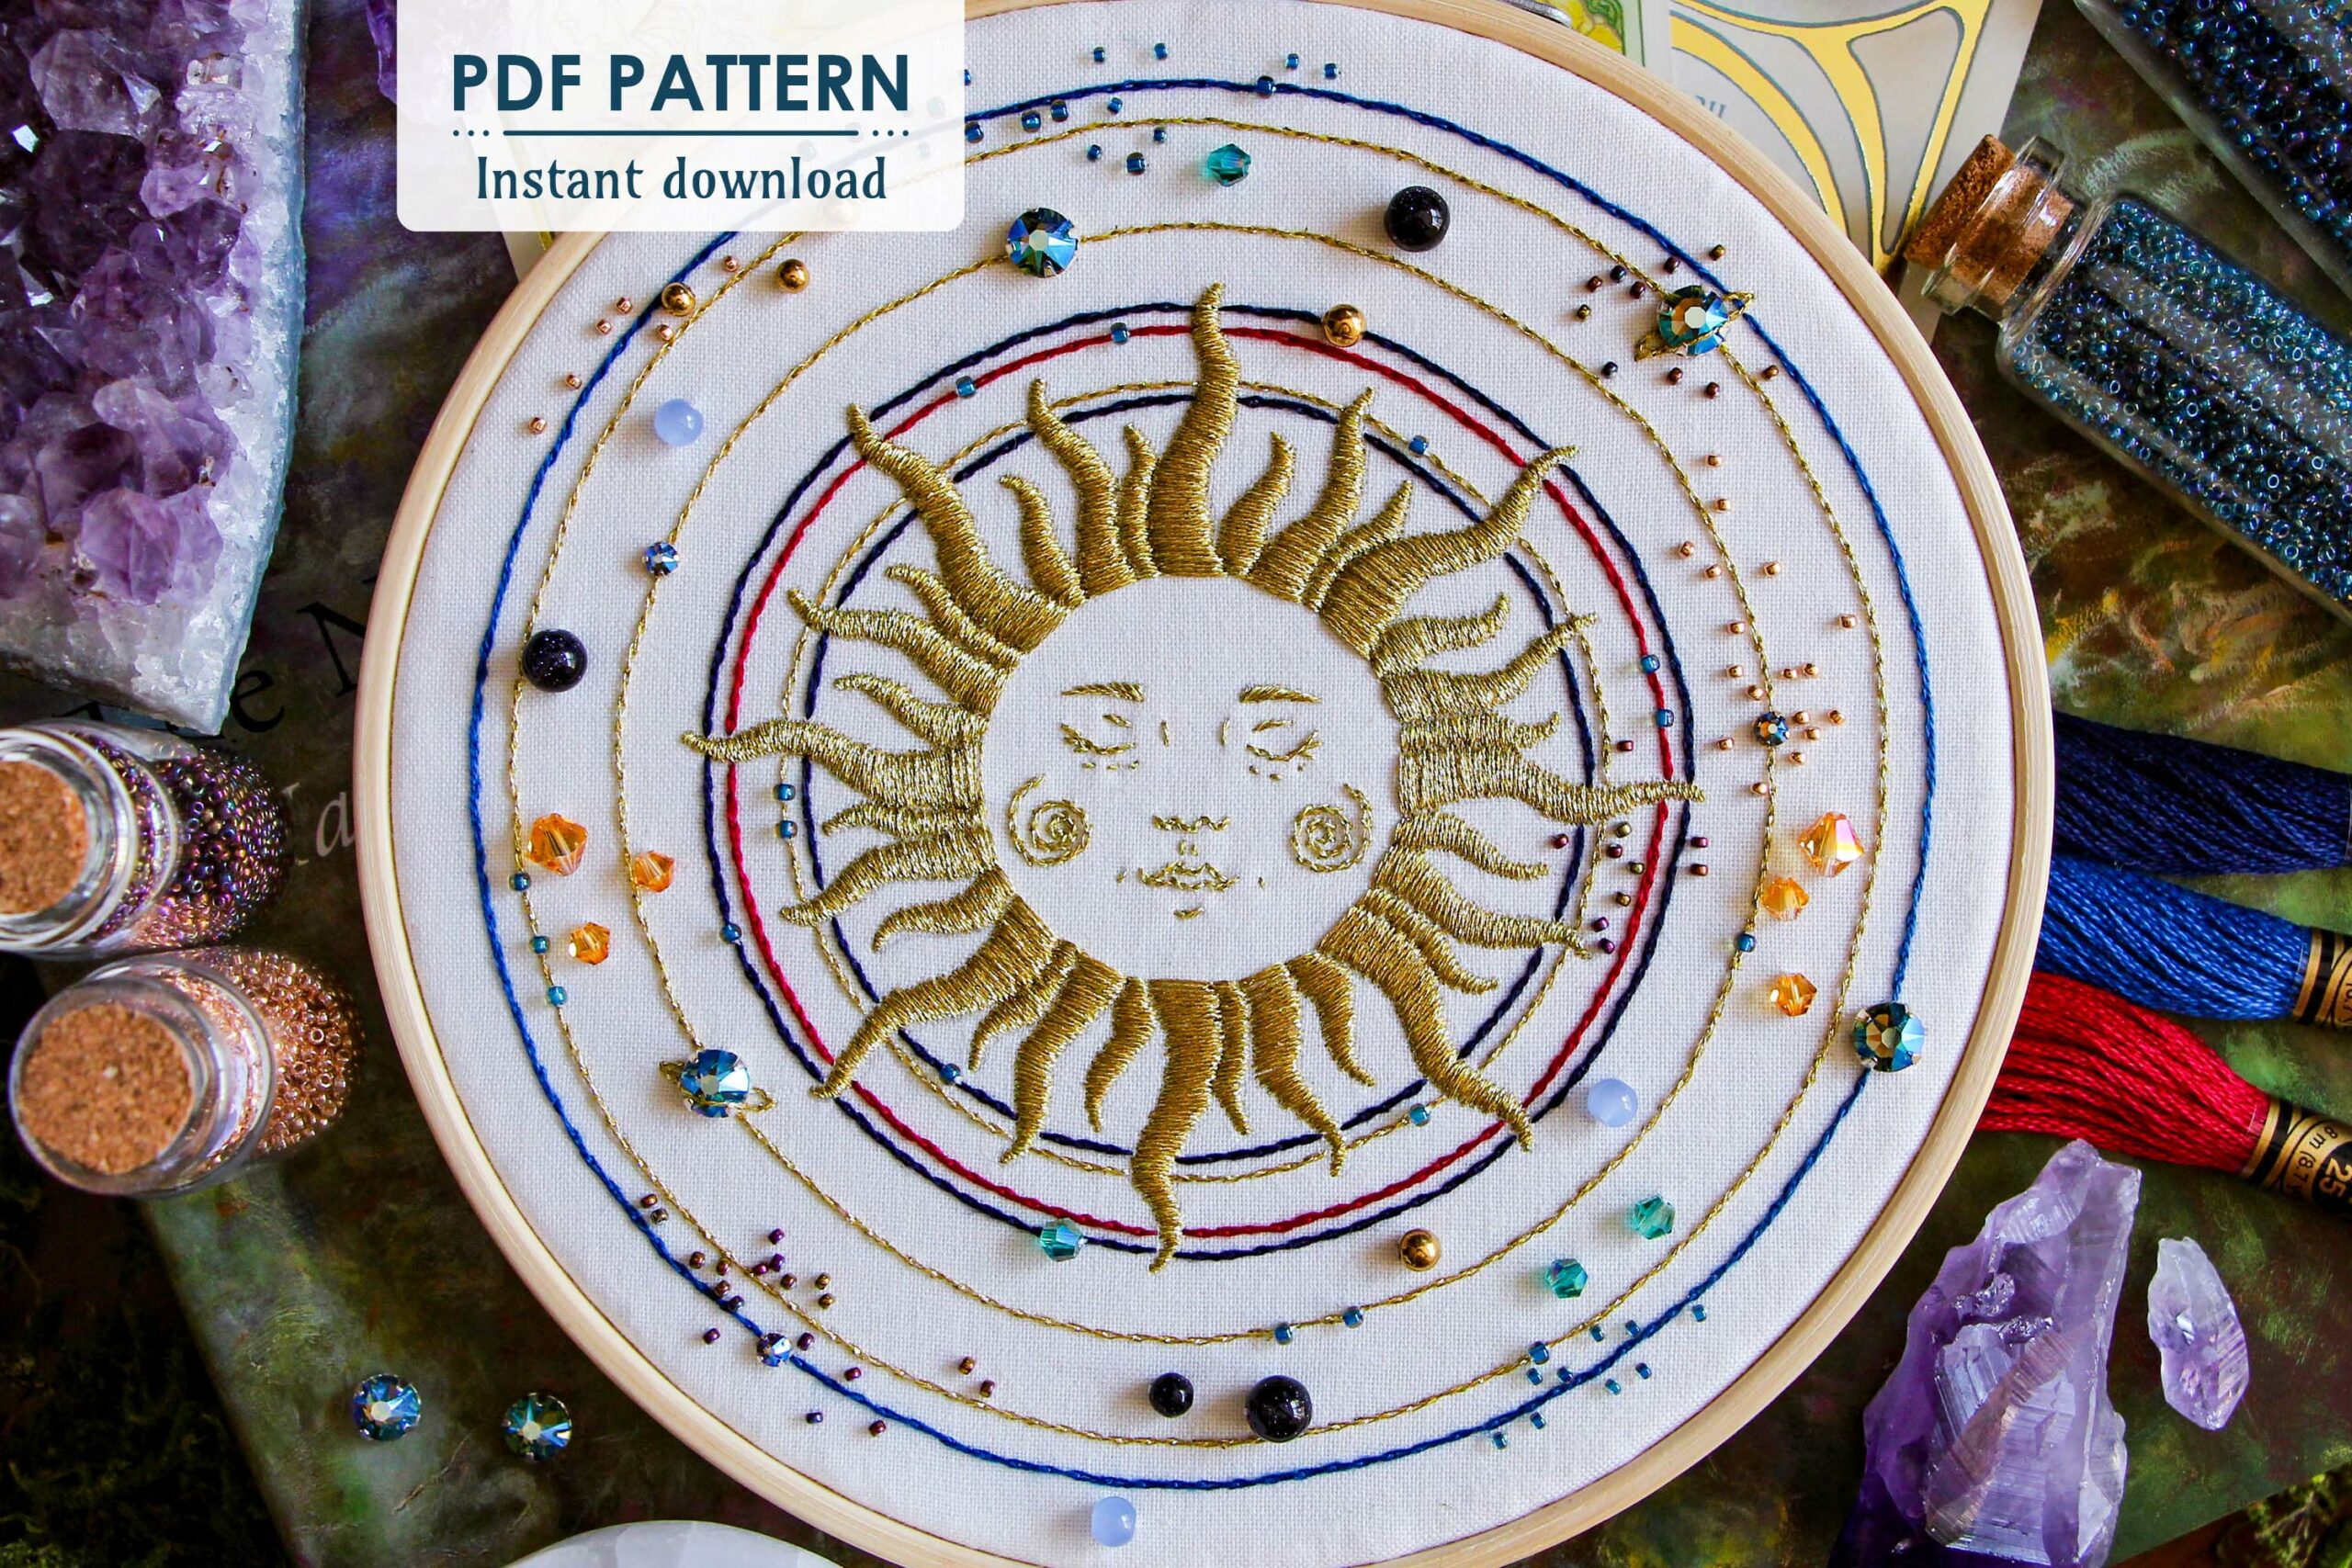 Photo of the Sun Galaxy bead embroidery pattern with "PDF Pattern" sticker and surrounded by embroidery materials